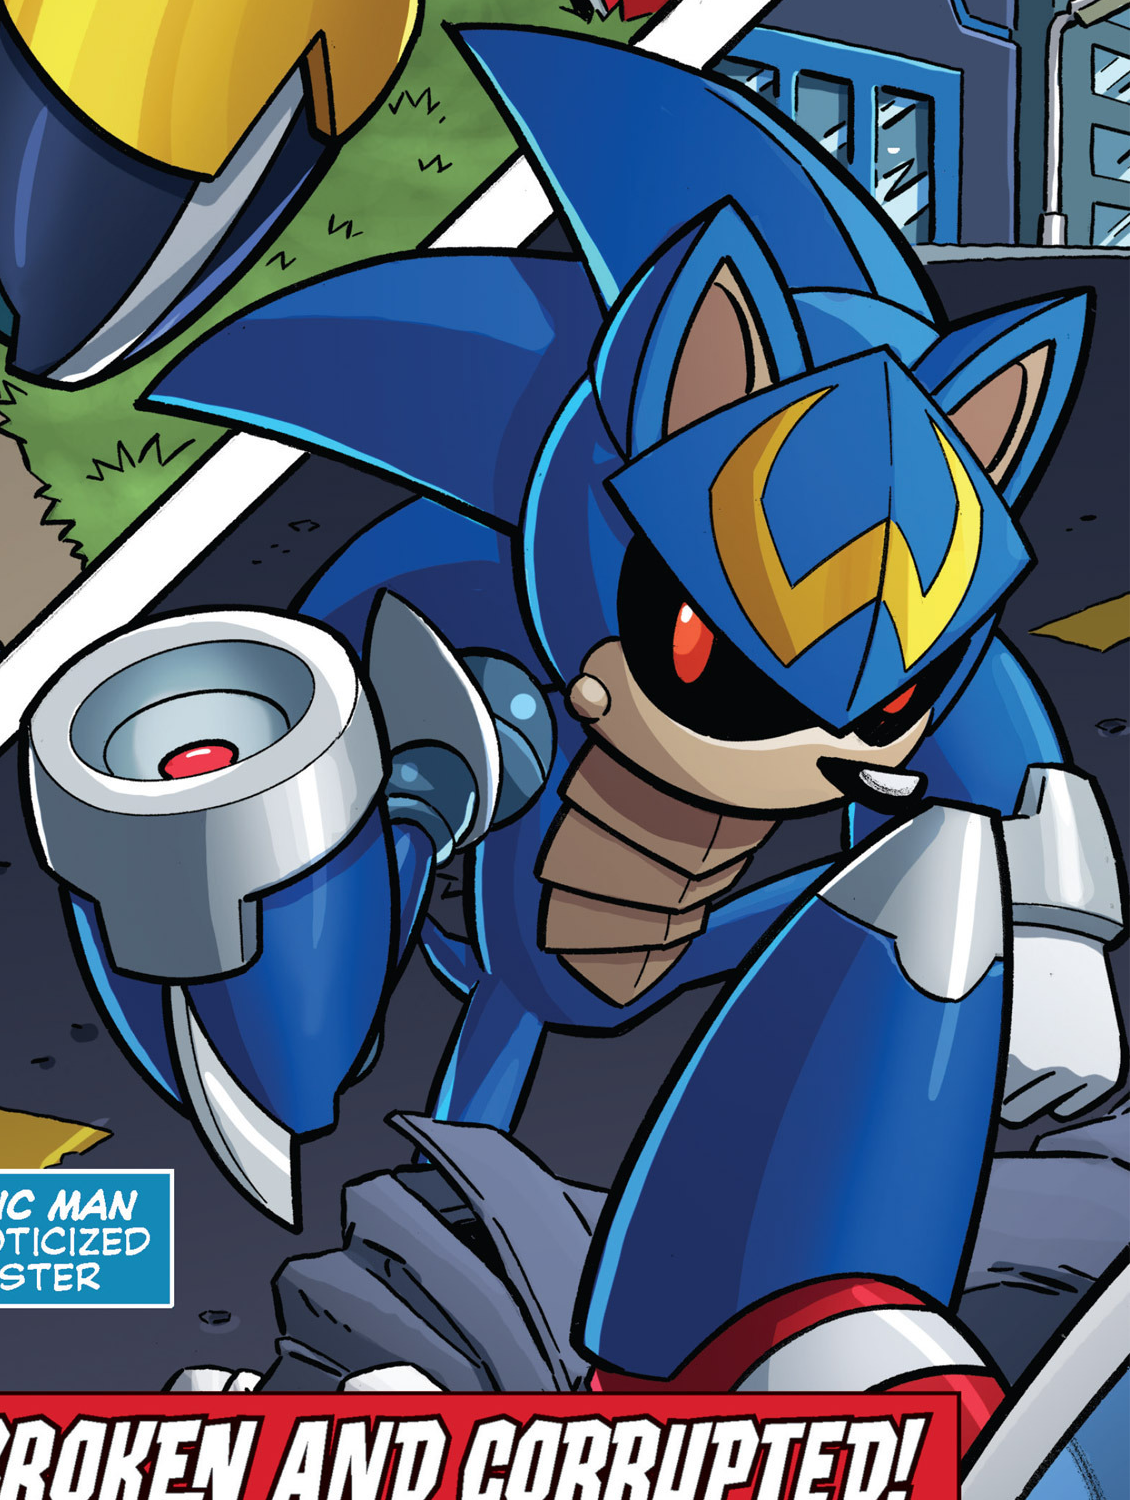 sonic man of the year